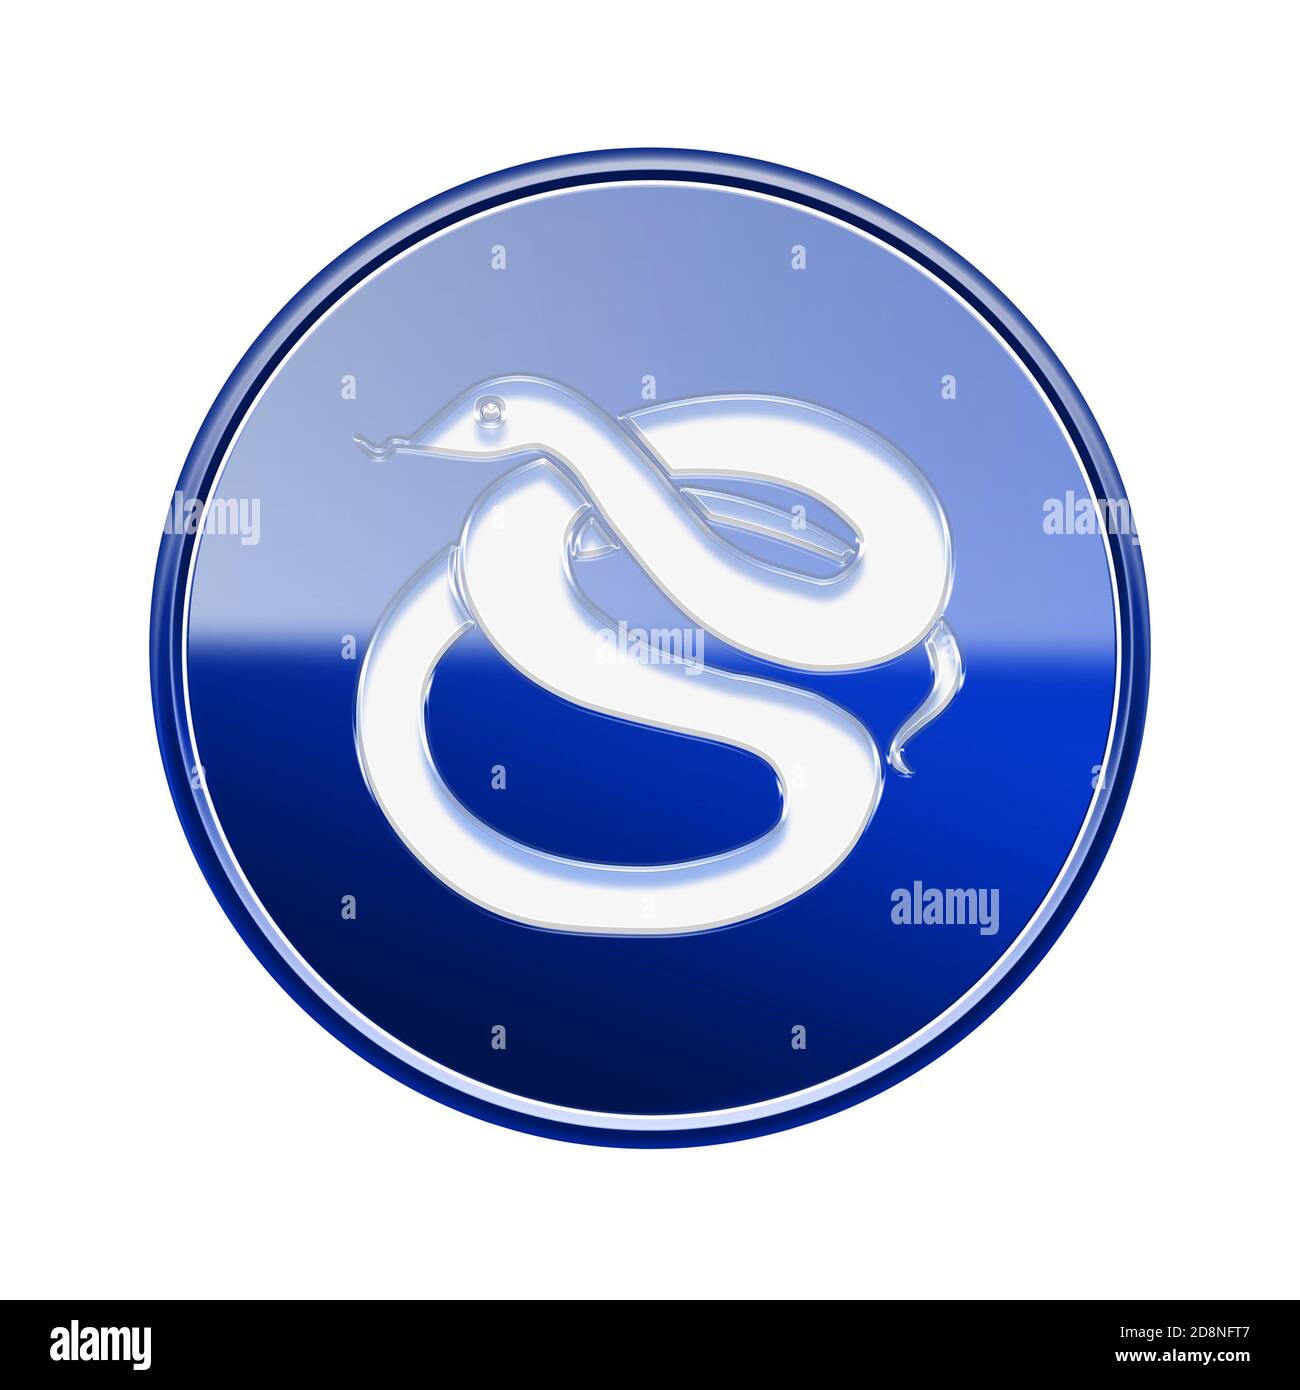 Snake Star High Resolution Stock Photography and Images - Alamy